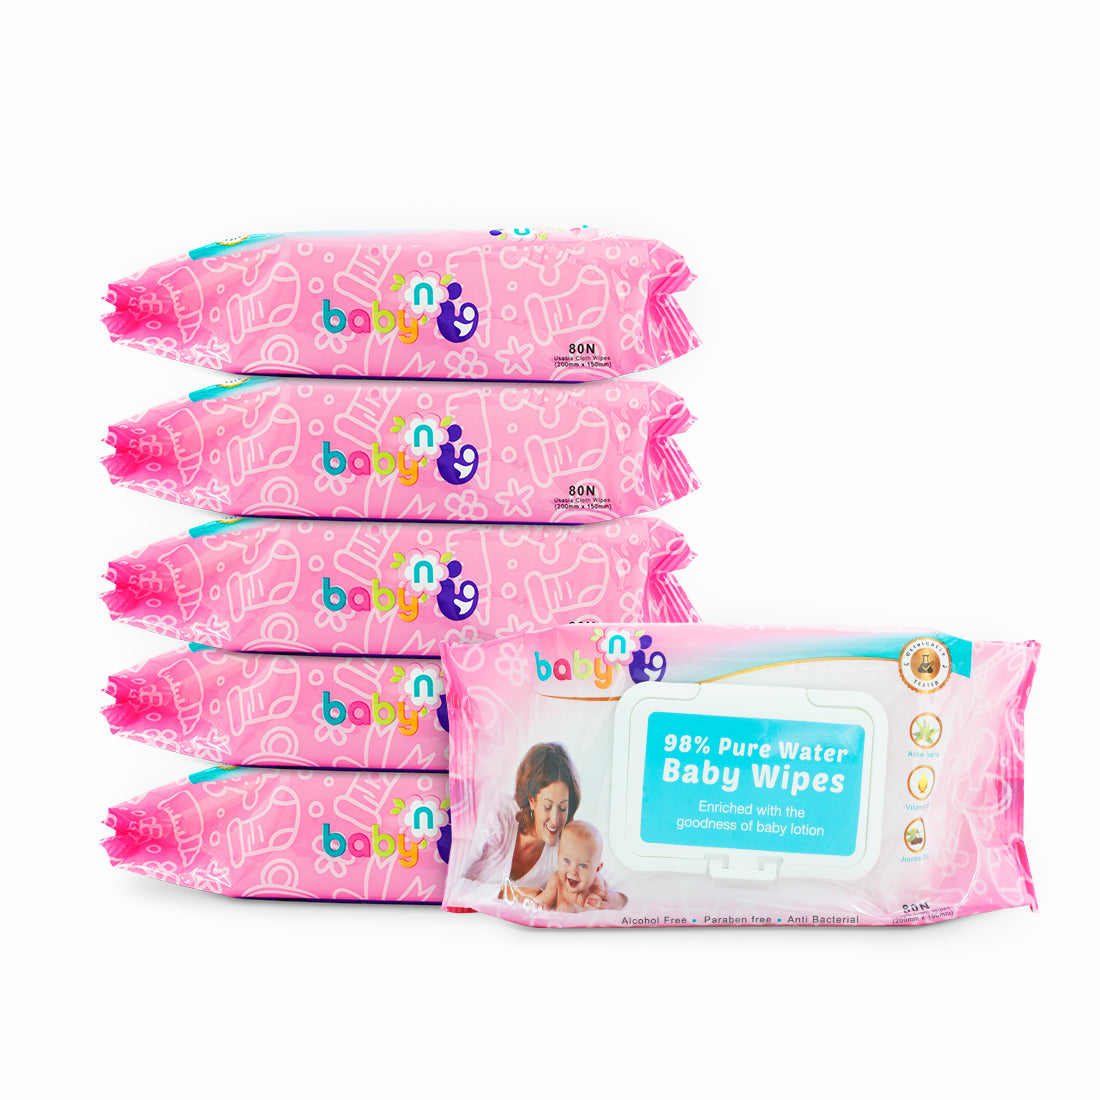 98% Pure Water Baby Wipes - Pack of 6